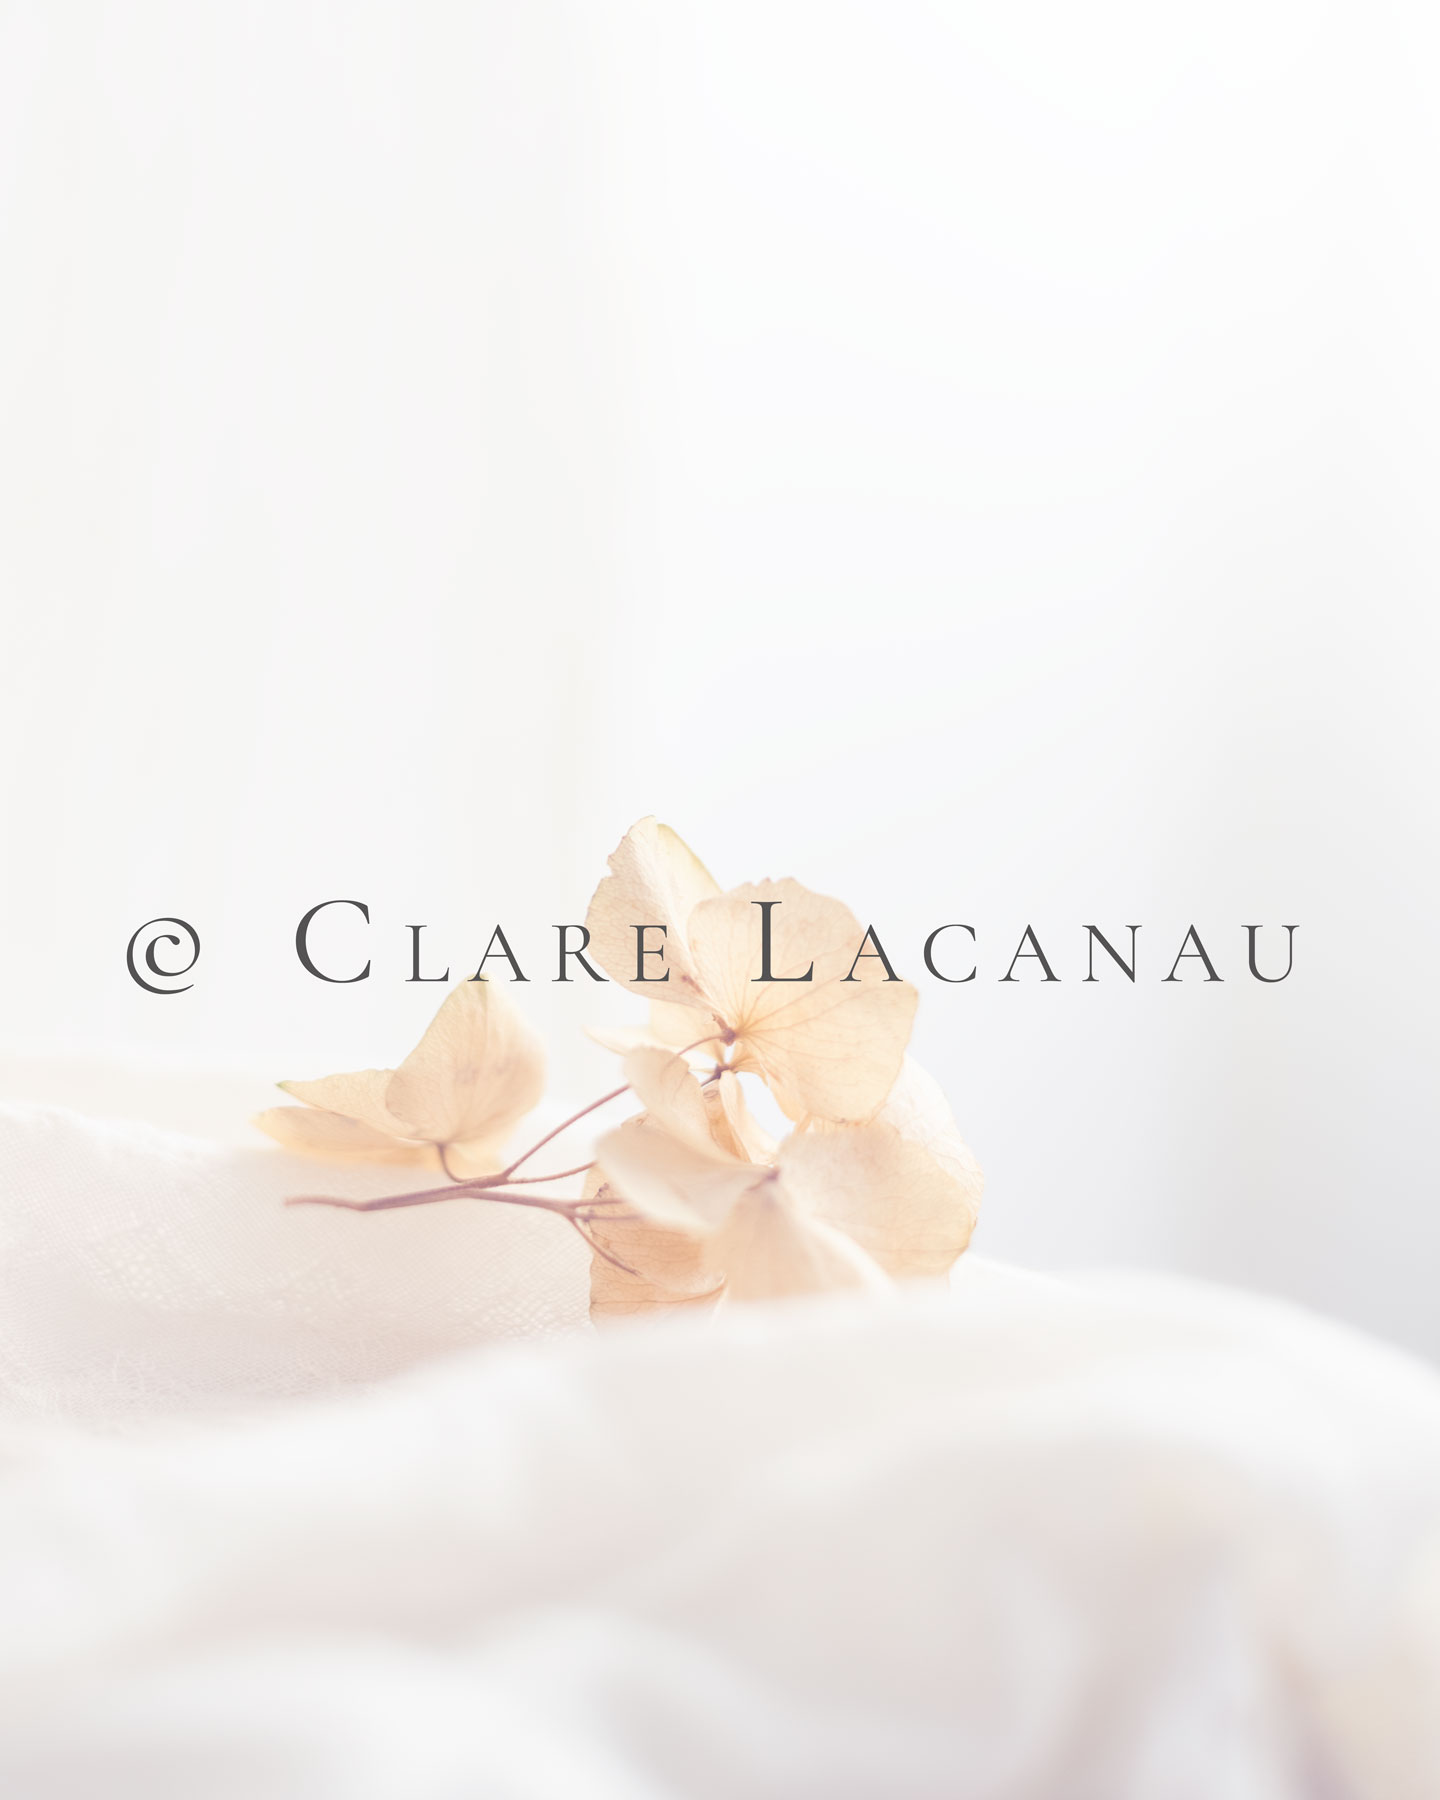 A photograph of a single piece of dried hydrangea on a light white background